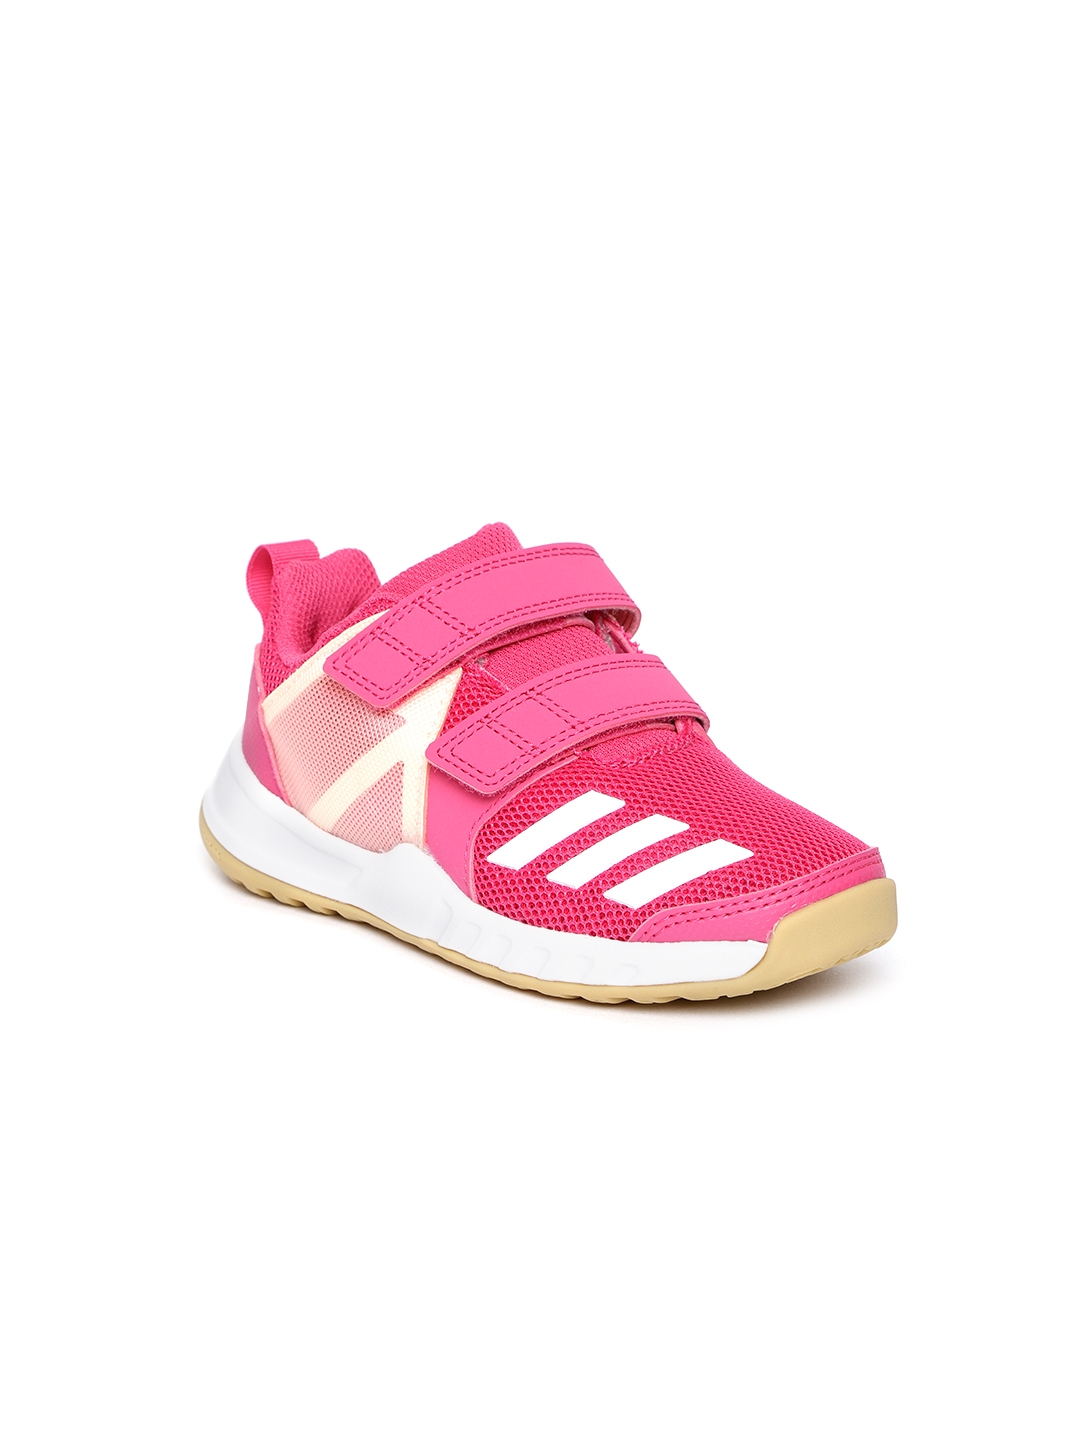 Buy ADIDAS Unisex Pink Training Or Gym Shoes - Sports Shoes for Unisex ...